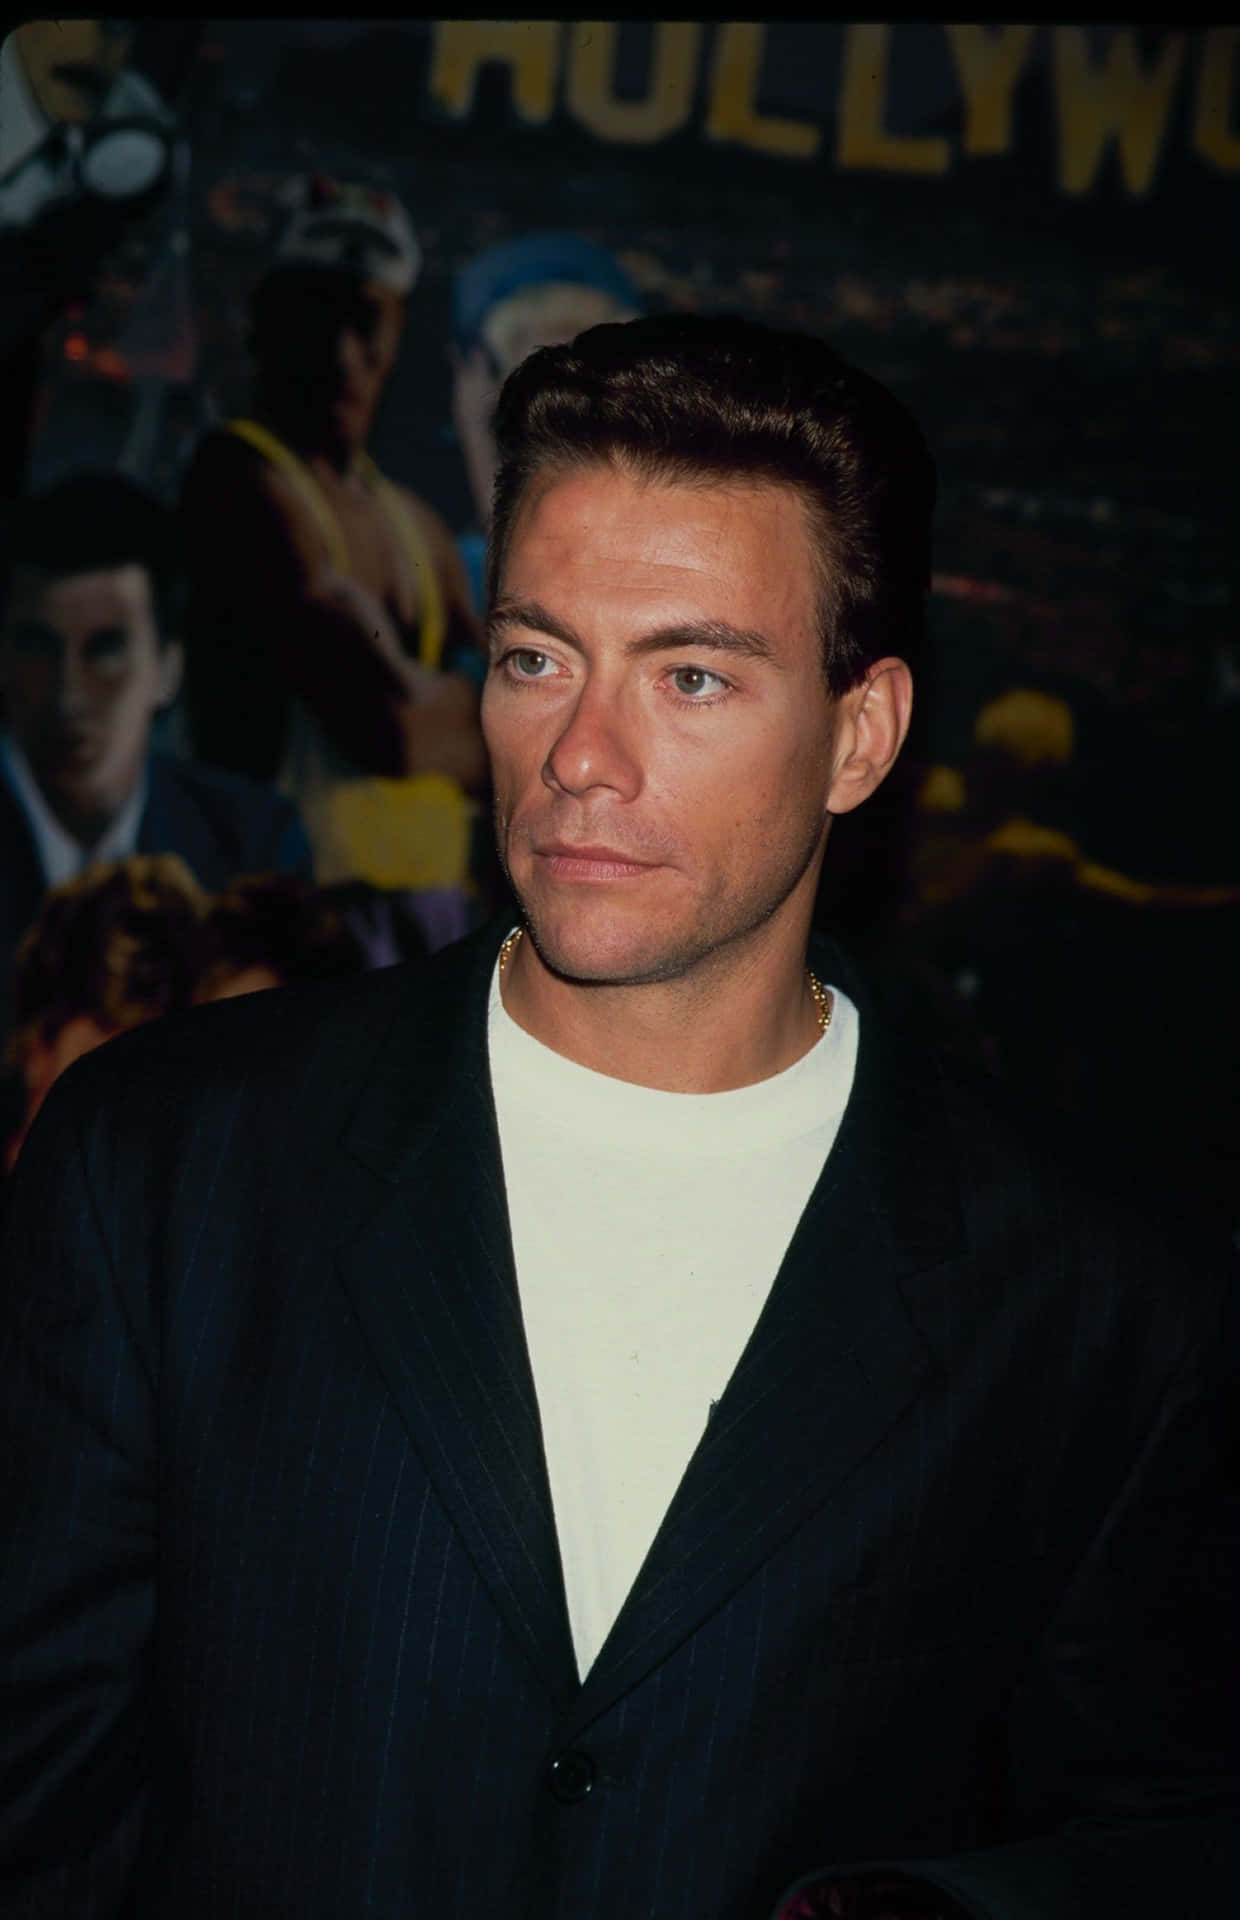 A Determined Jean Claude Van Damme In A Striking Pose. Background